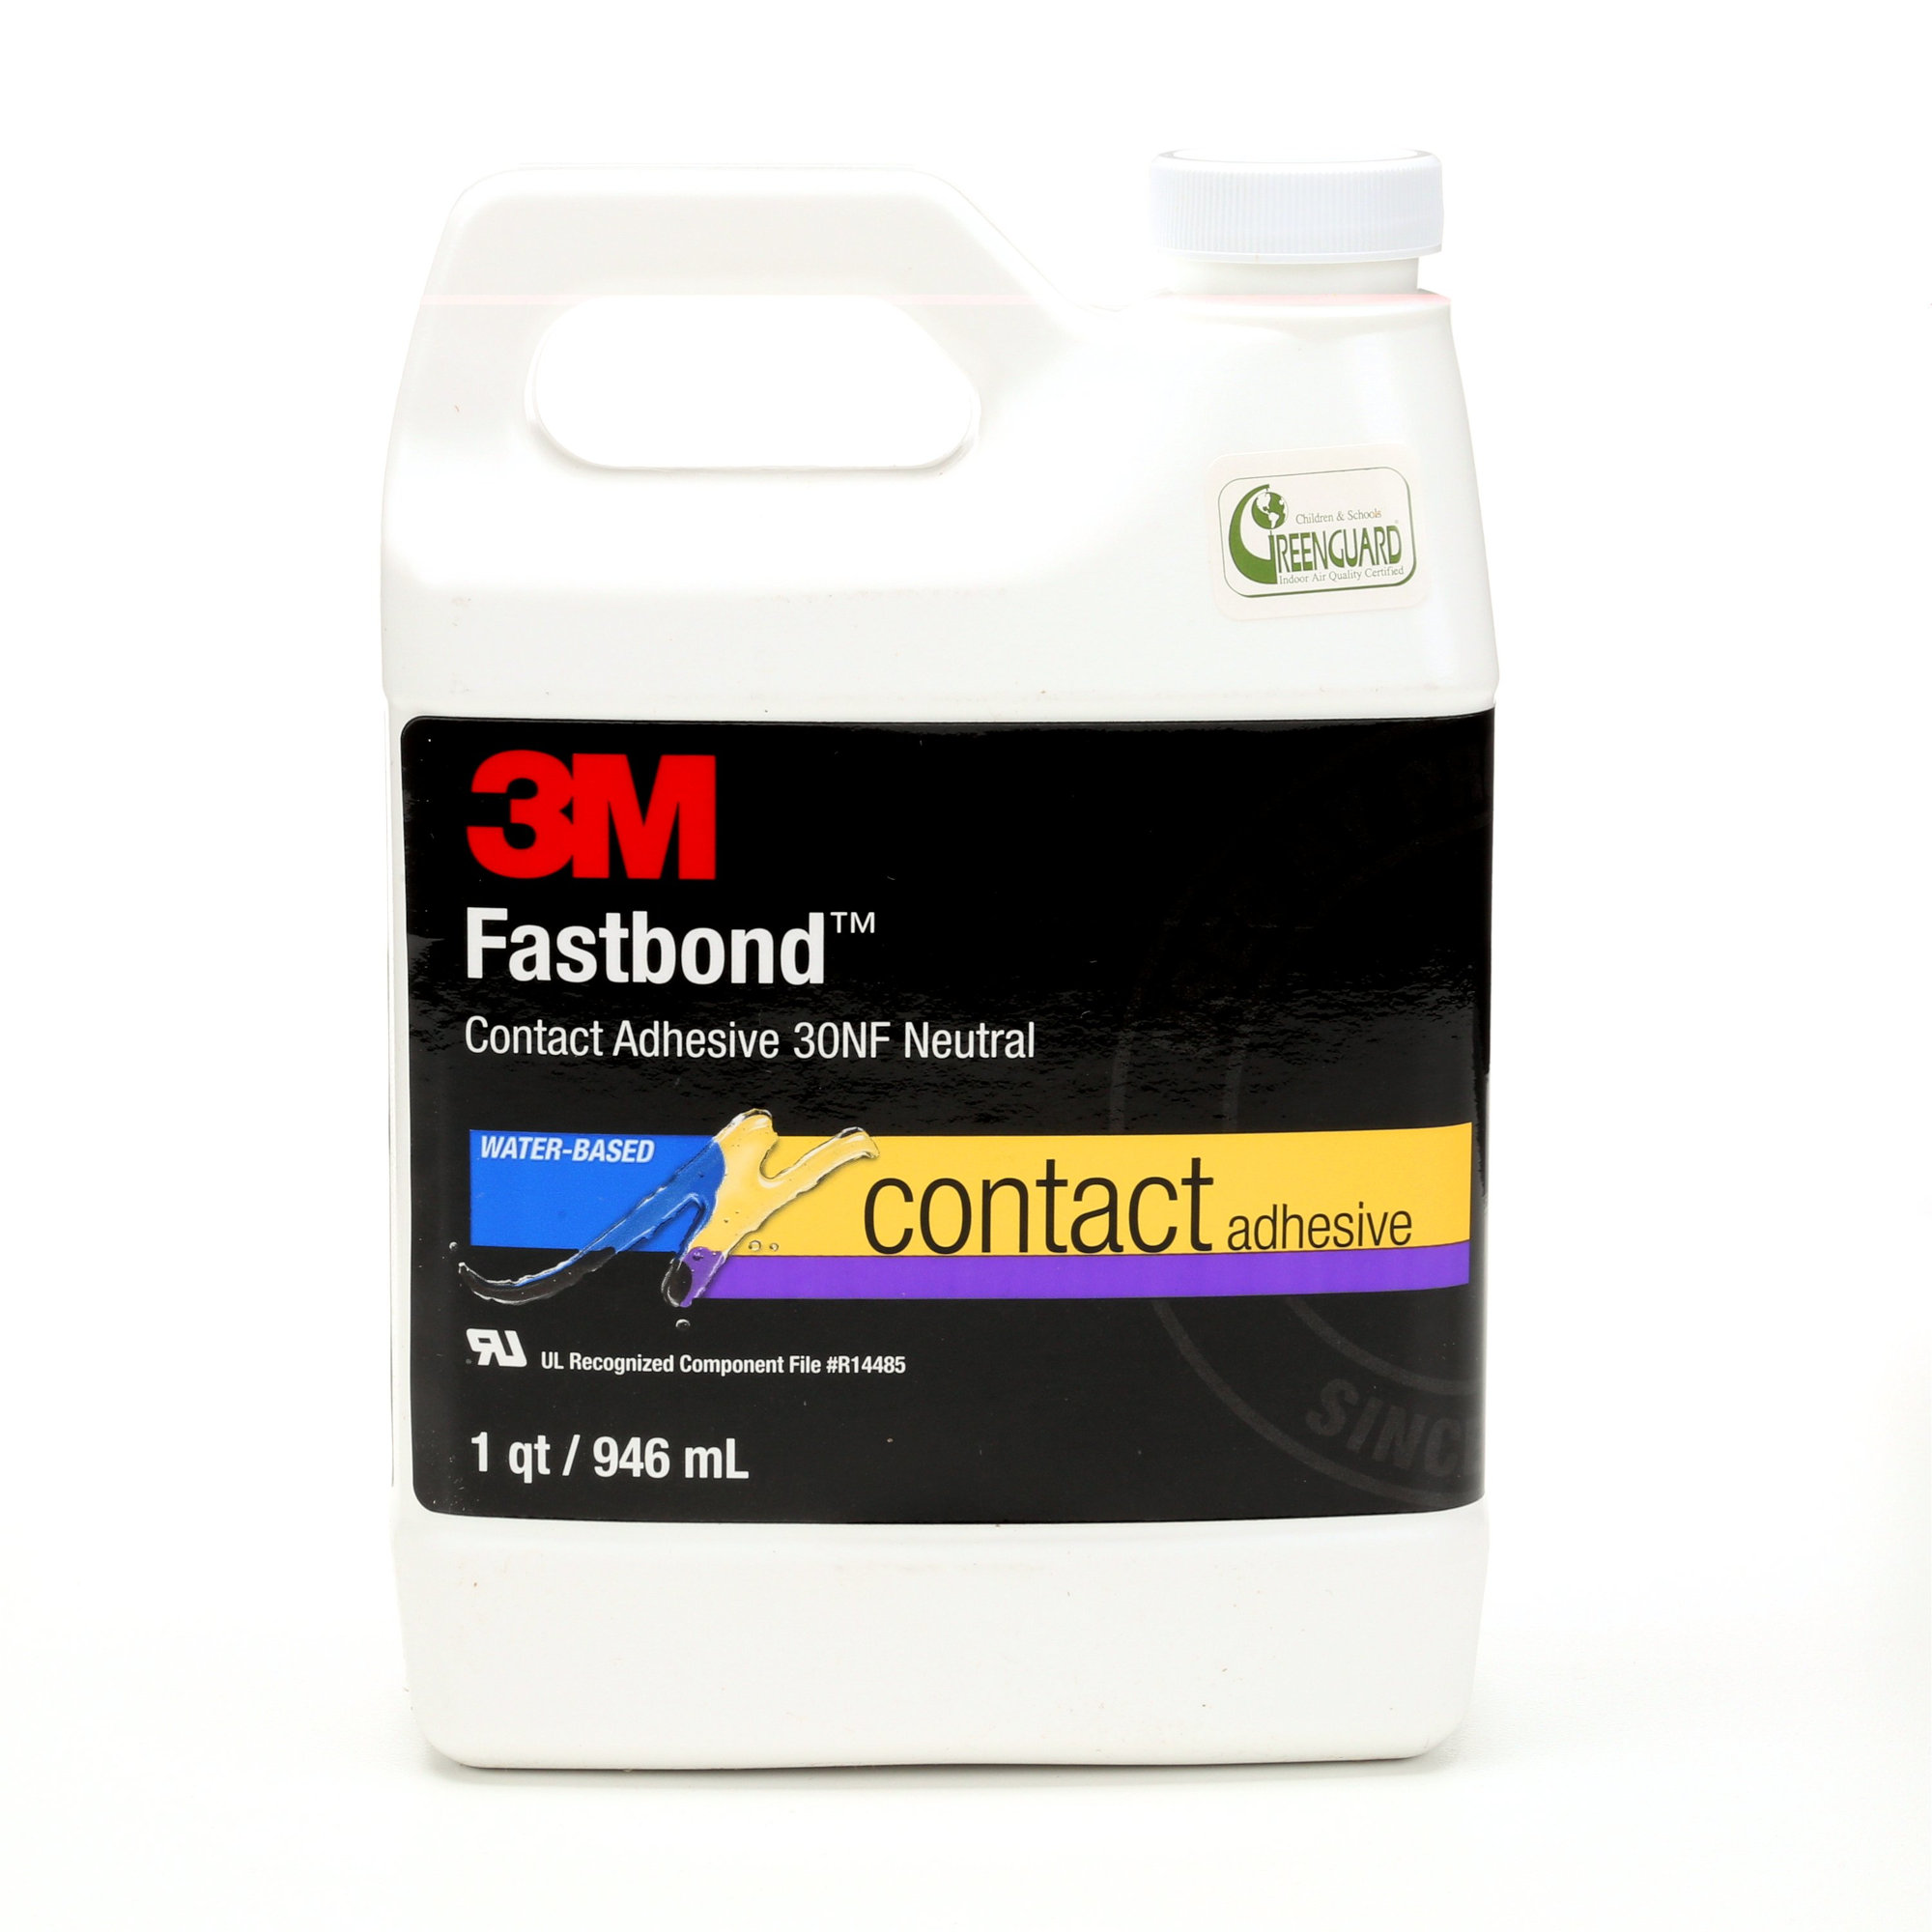 https://s7d2.scene7.com/is/image/sherwinwilliams/3M_Fastbond_Contact_Adhesive_30NF?fit=constrain,1&wid=2000